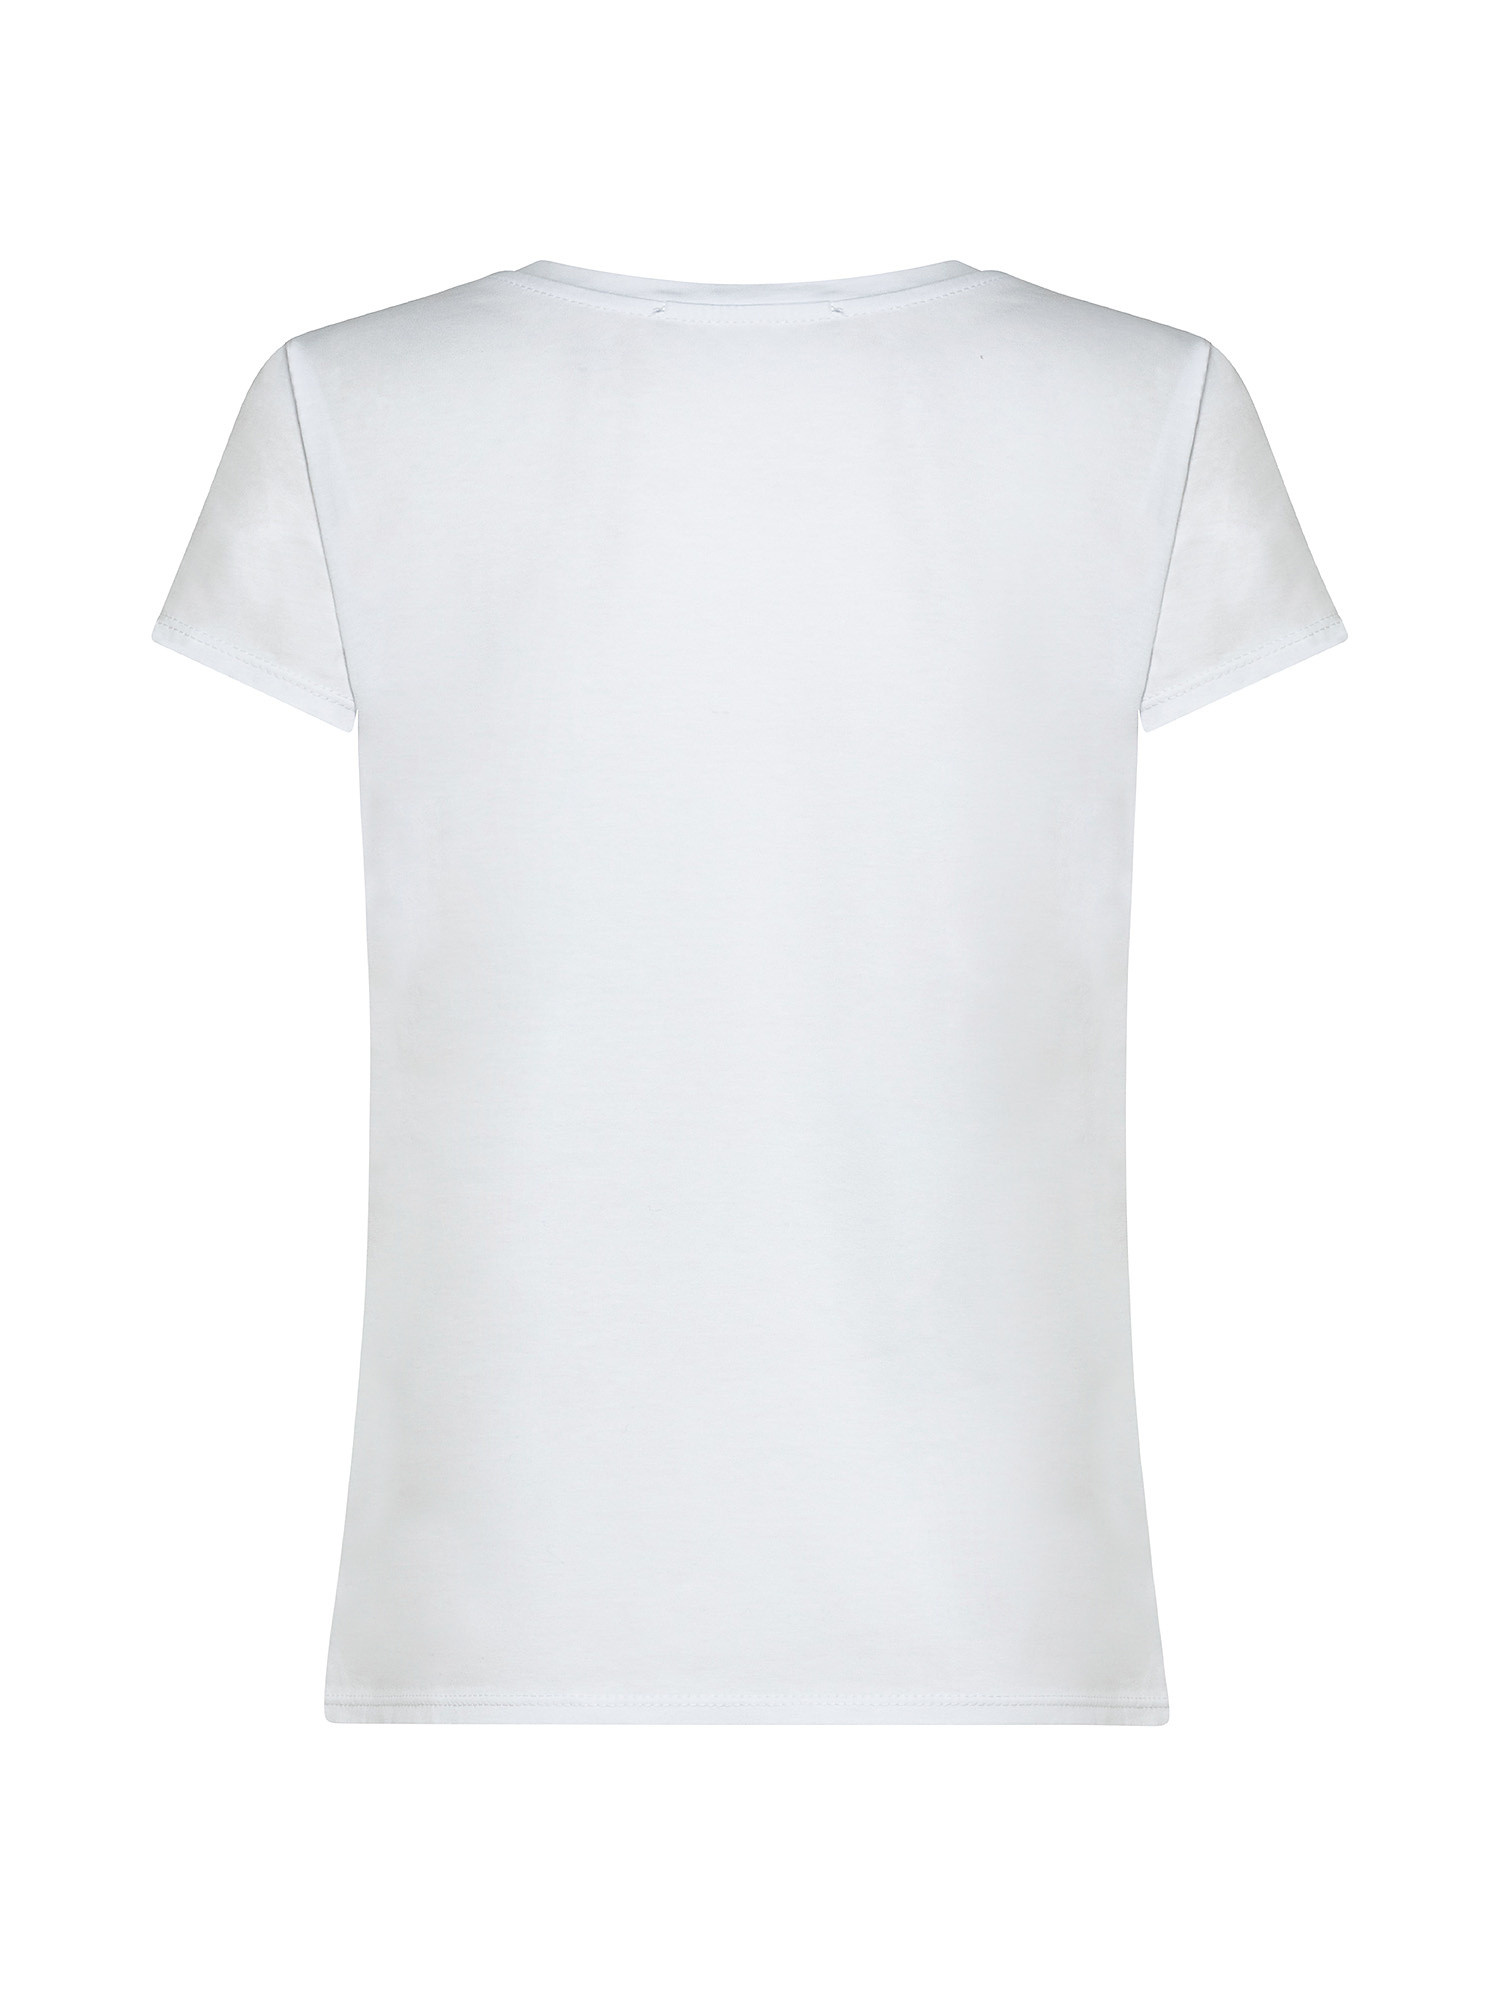 Round neck T-shirt with flowers, White, large image number 1